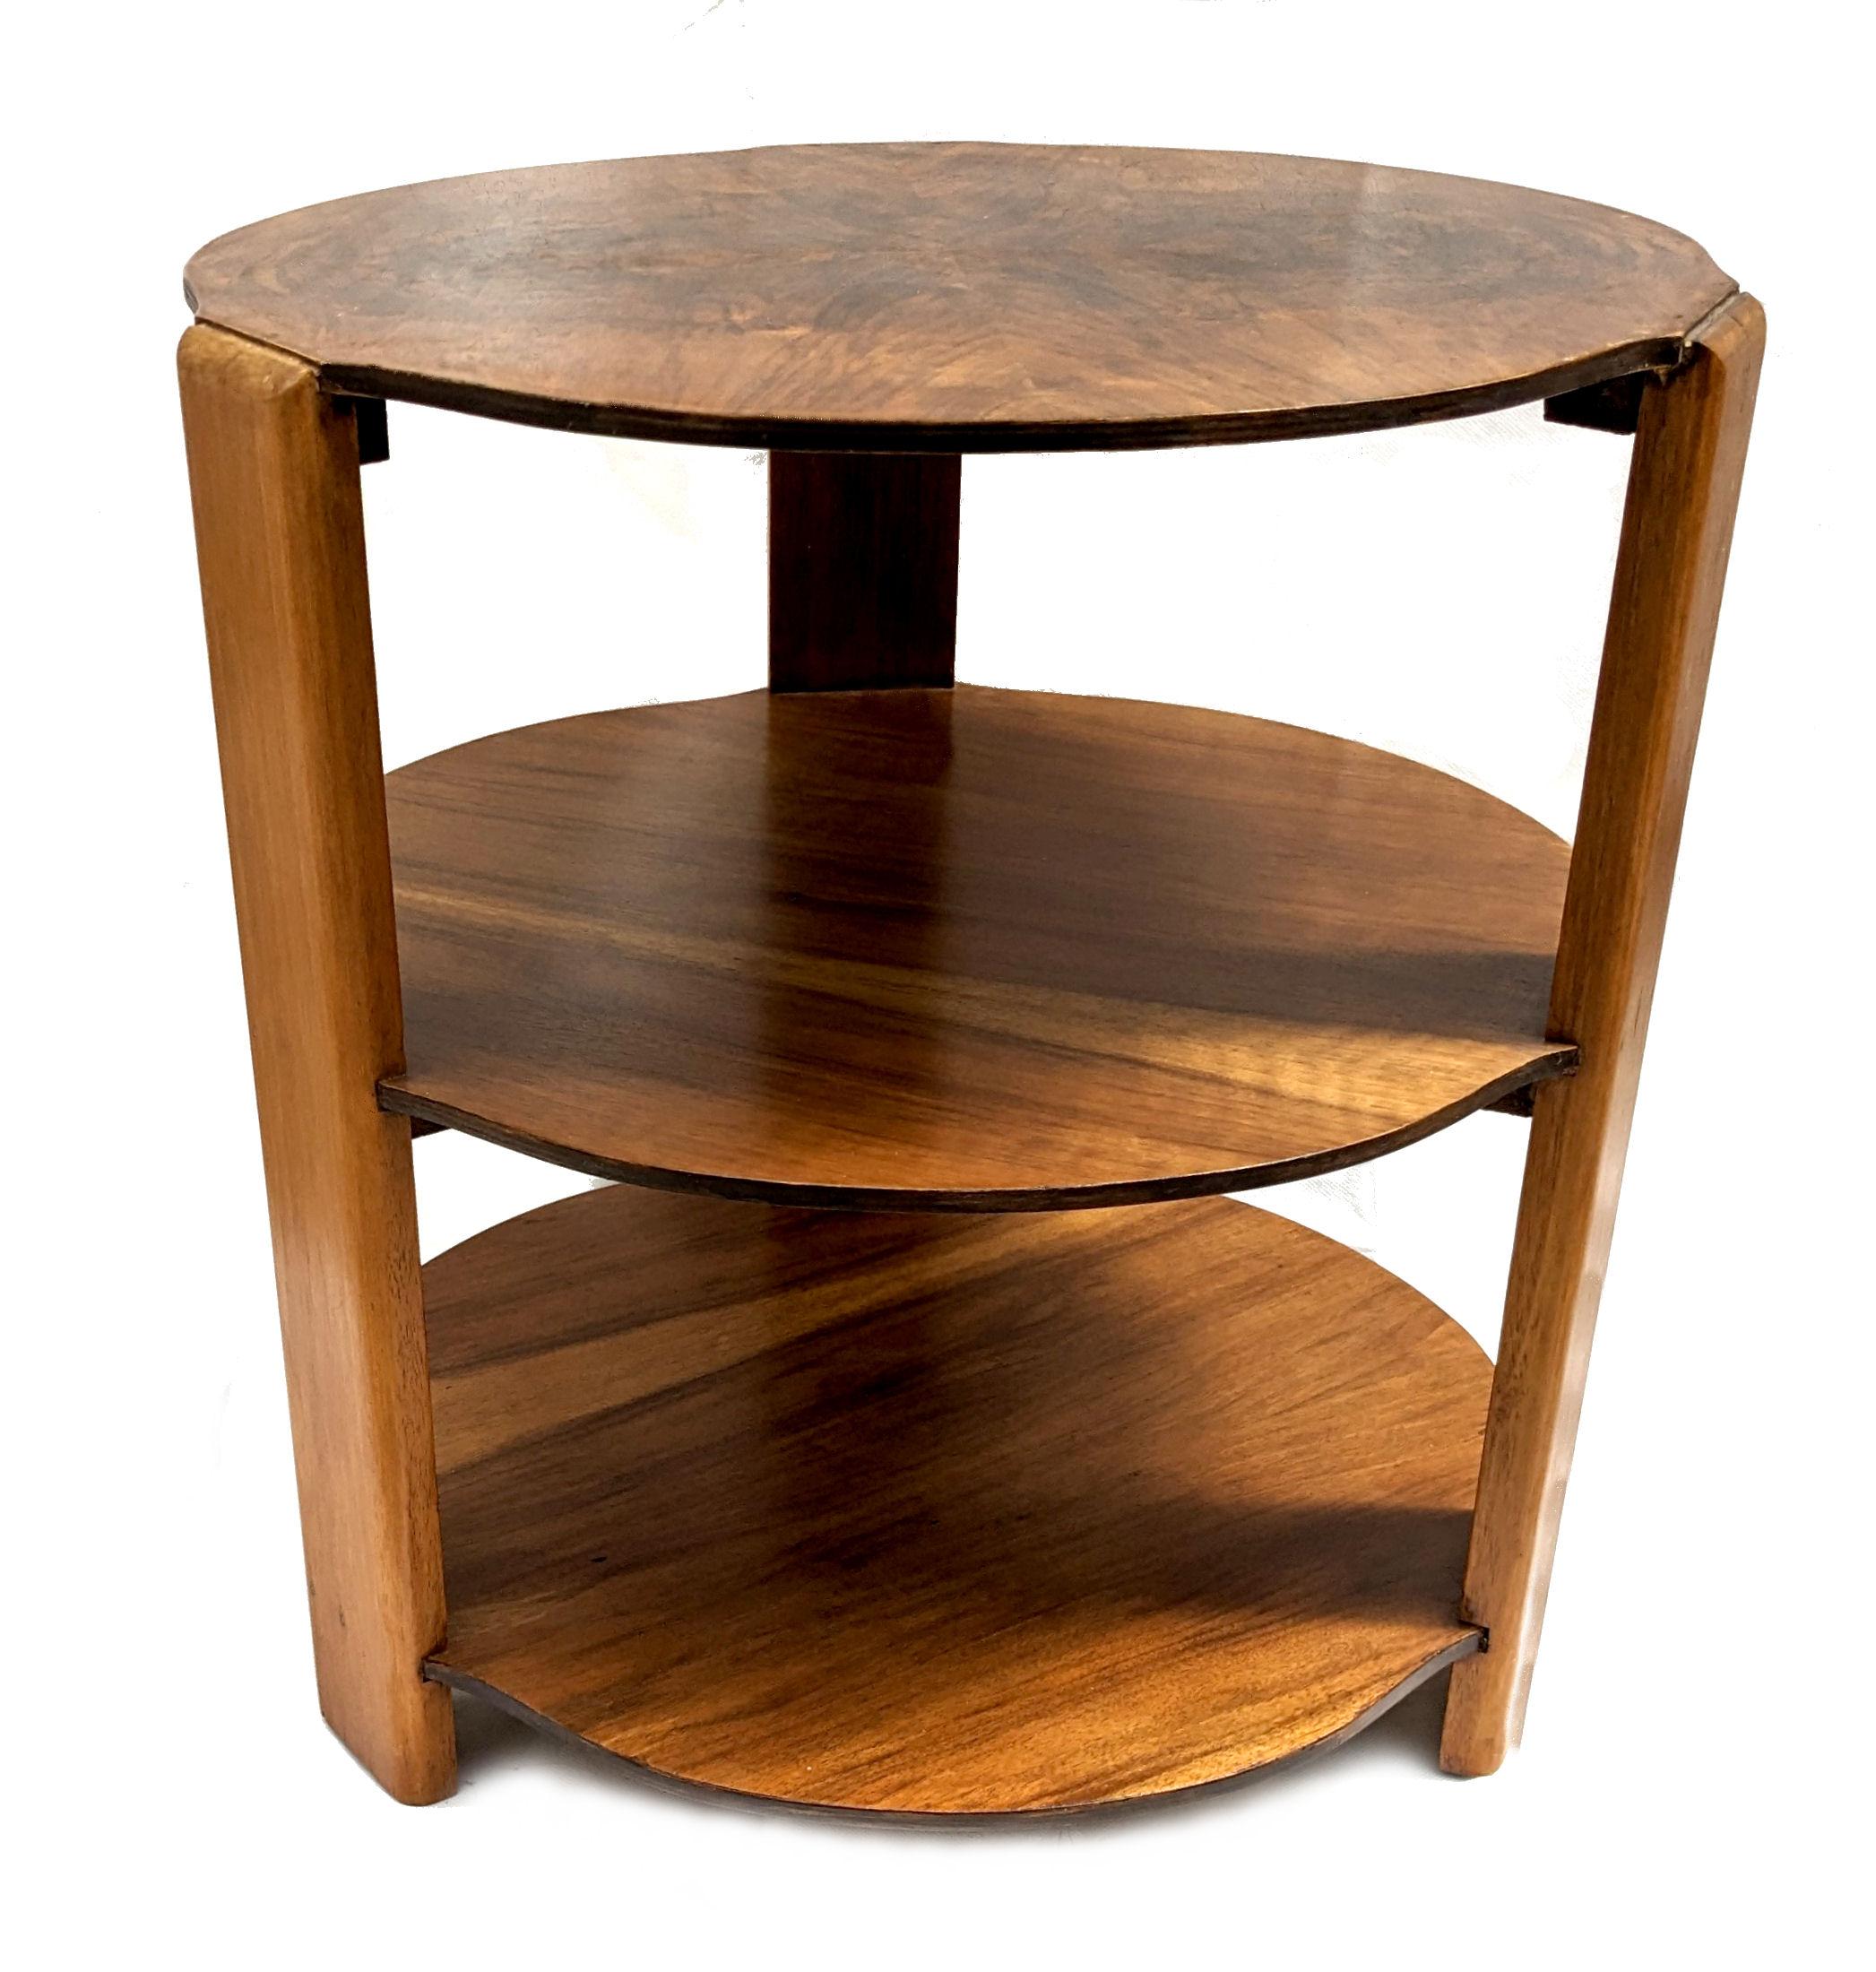 20th Century Art Deco Heavily Figured Walnut Occasional Table, English, circa 1930 For Sale